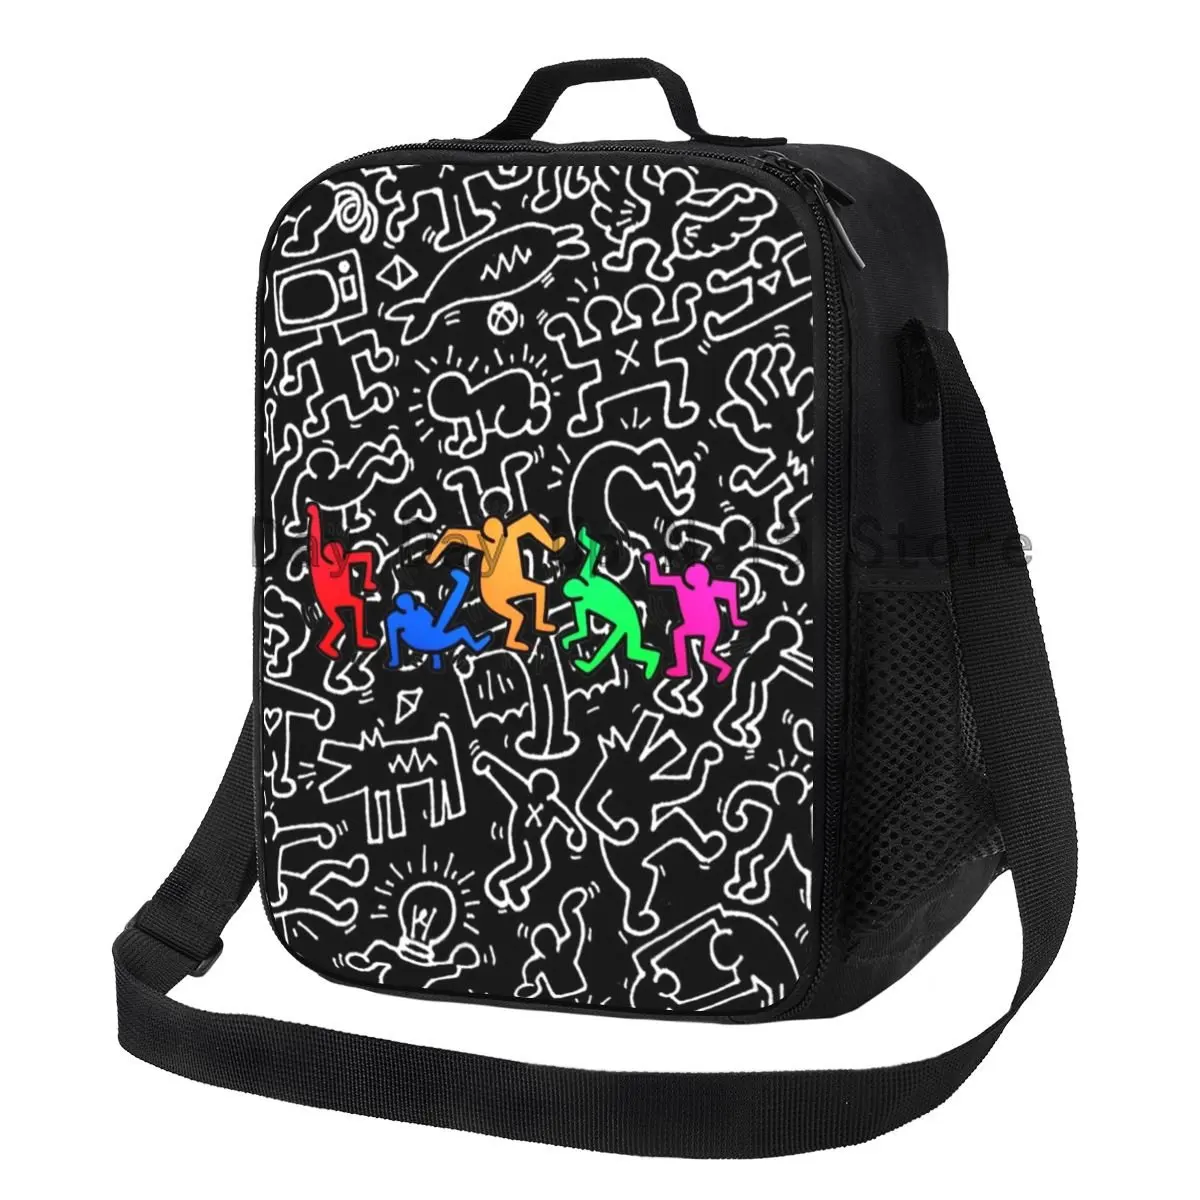 

Haring Graffiti Paintings Art Black DanCe Resuable Lunch Box Leakproof Abstract Pop Art Thermal Cooler Food Insulated Lunch Bag